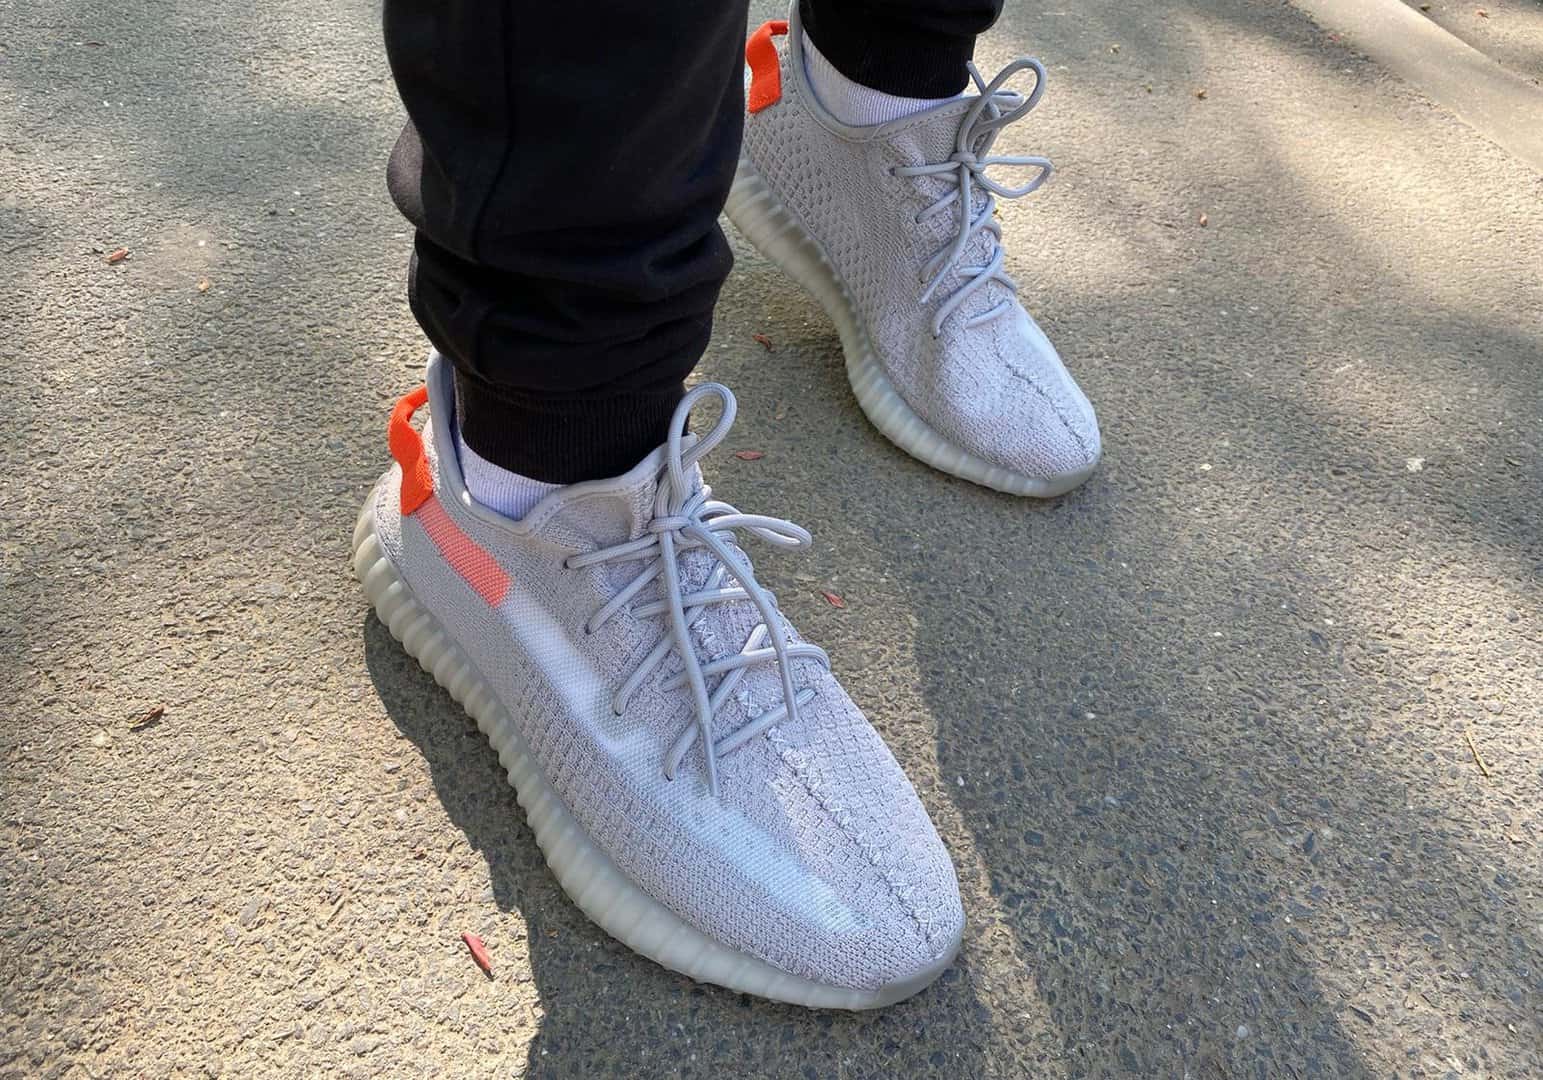 How To Spot Fake Yeezy Boost 350 V2 